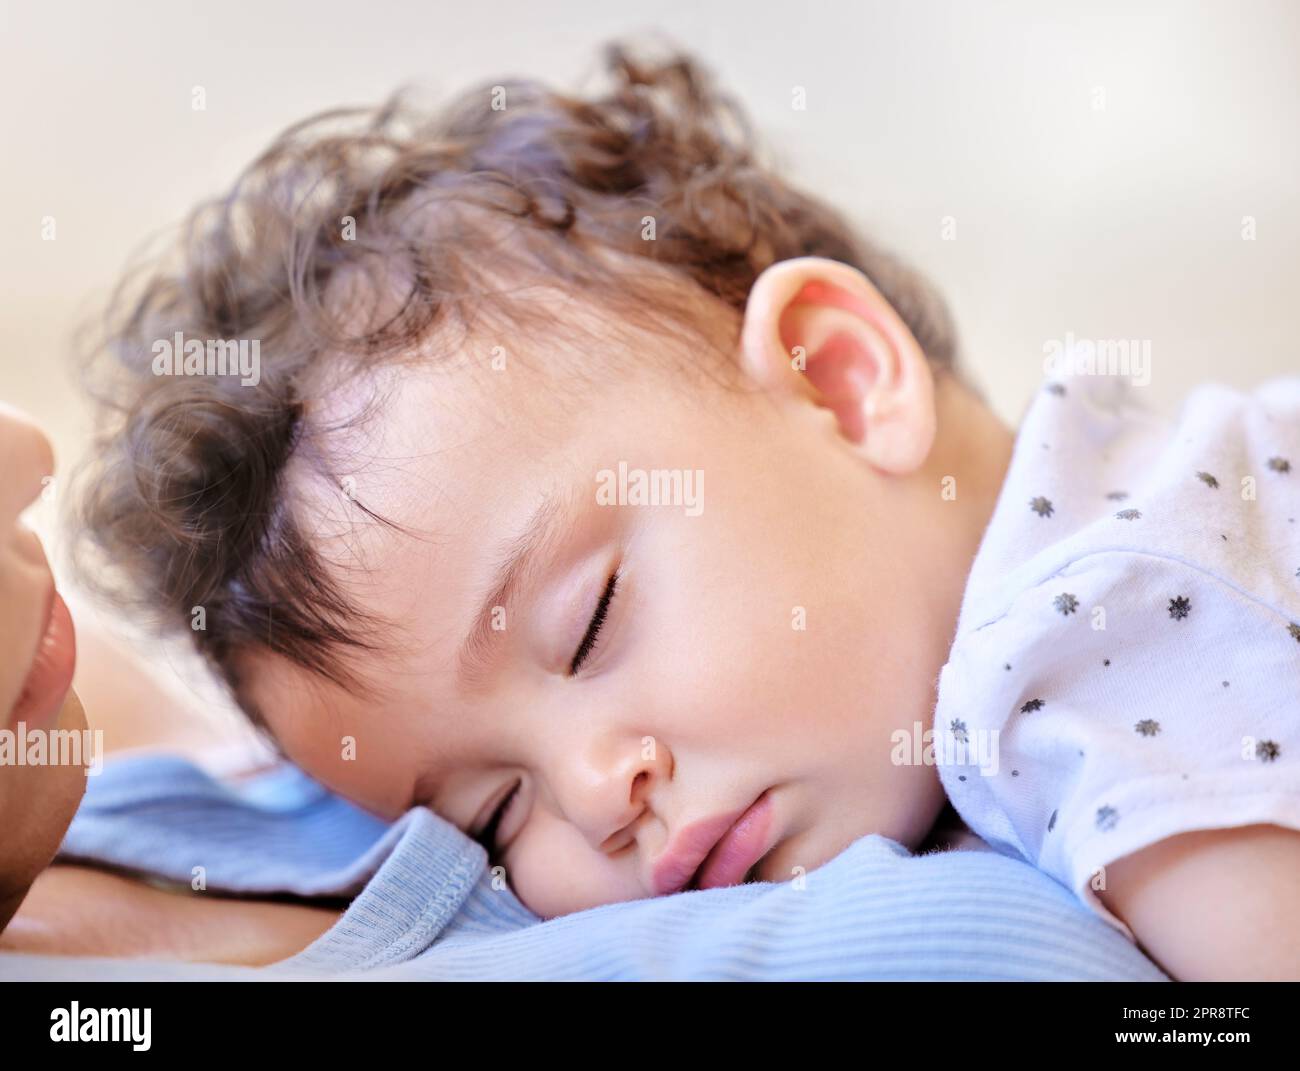 Little baby sleeping on mothers chest. Small girl asleep on her mom. Face of baby resting. Mother holding her sleeping child. Affectionate mother bonding with sleeping kid. Cute baby napping Stock Photo